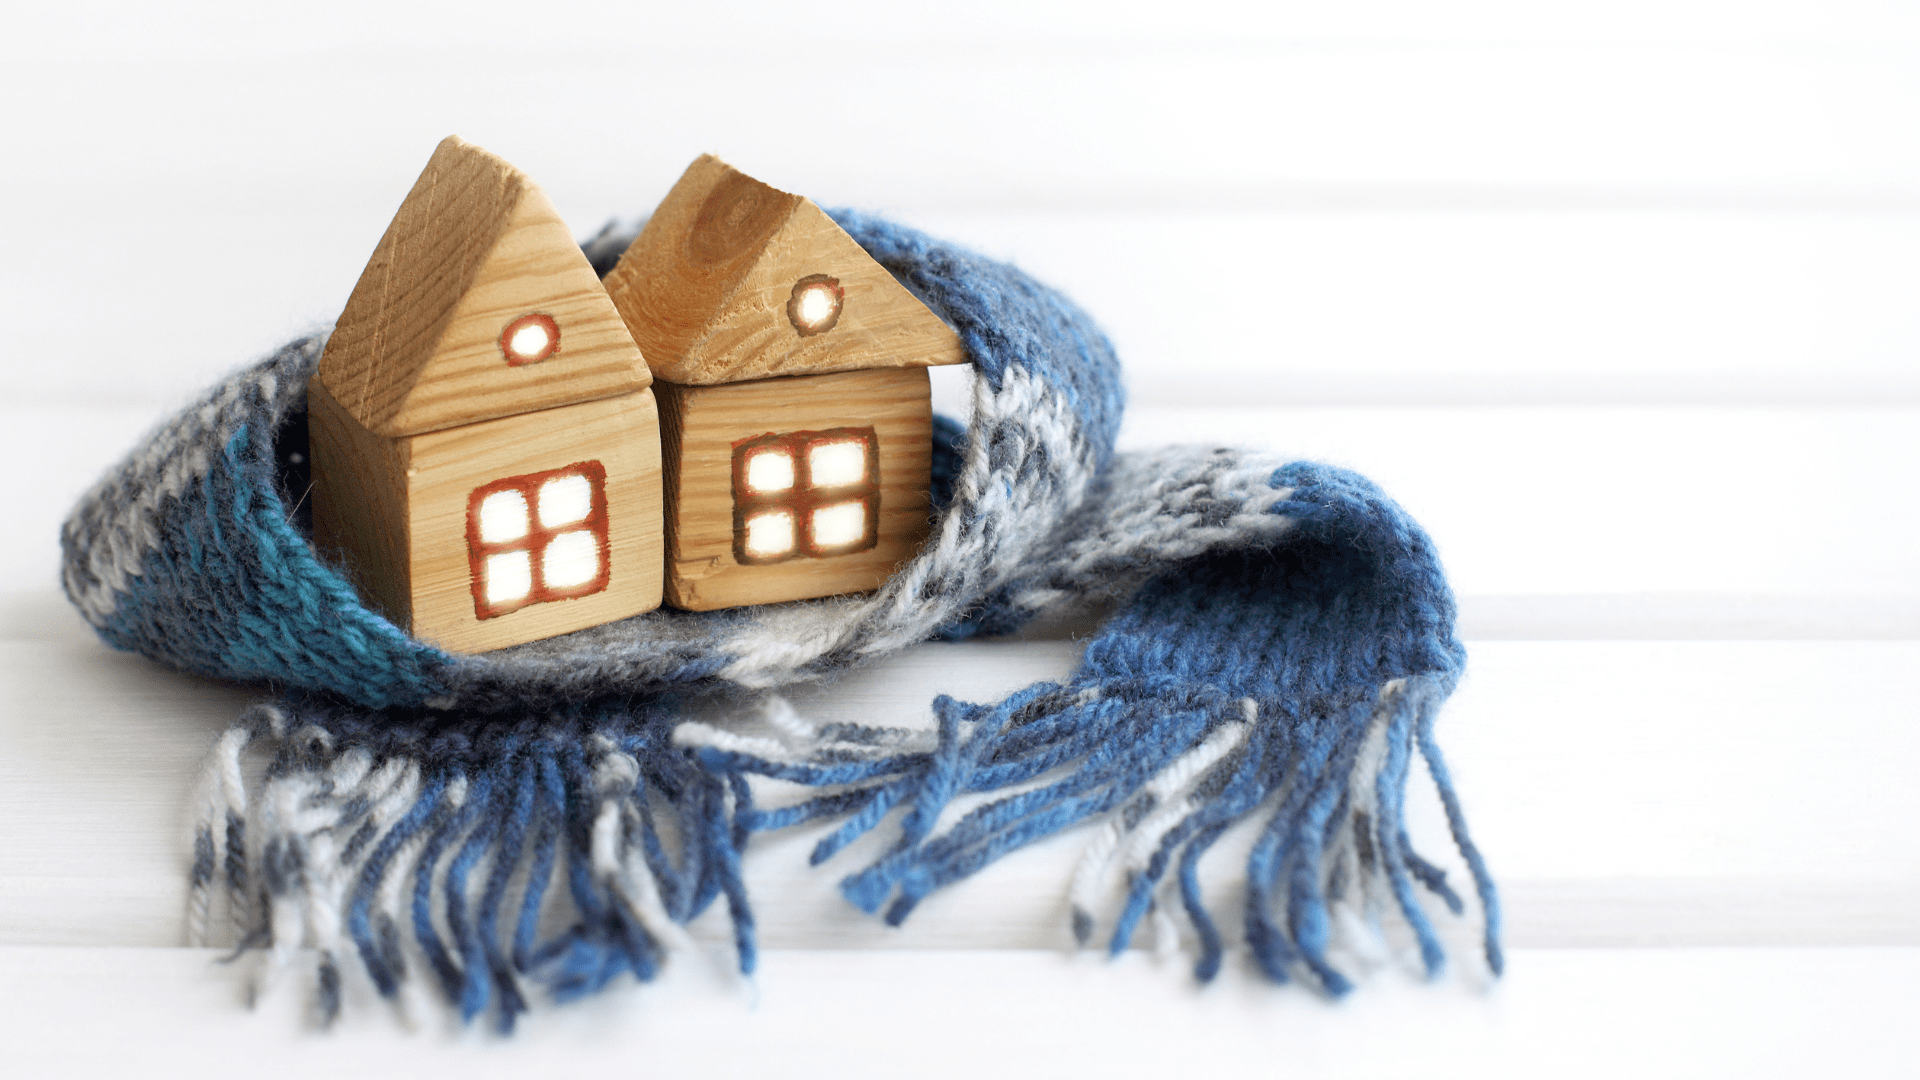 LimRic Heating Services Keep Homes Warm During the Winter